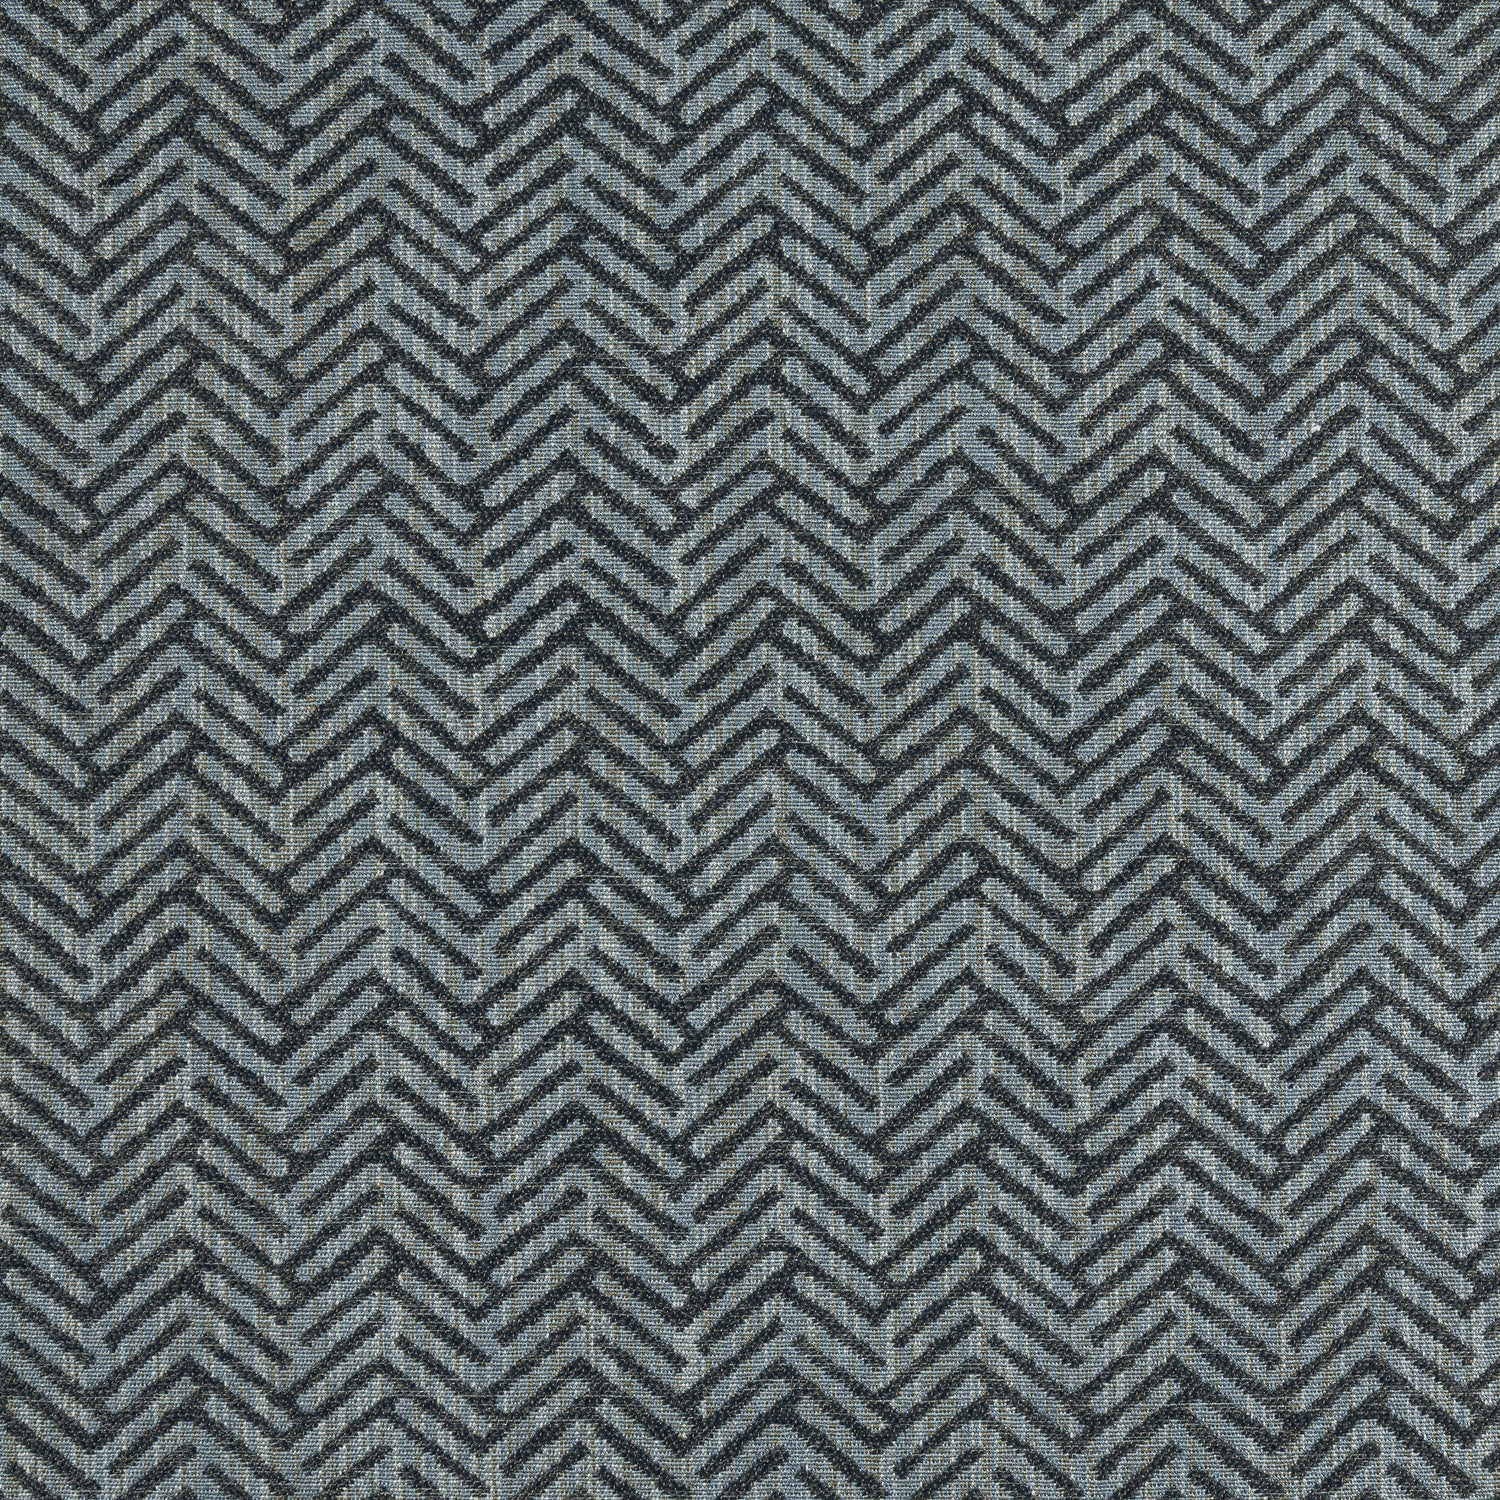 Varenna fabric in mineral color - pattern number W8113 - by Thibaut in the Sereno collection